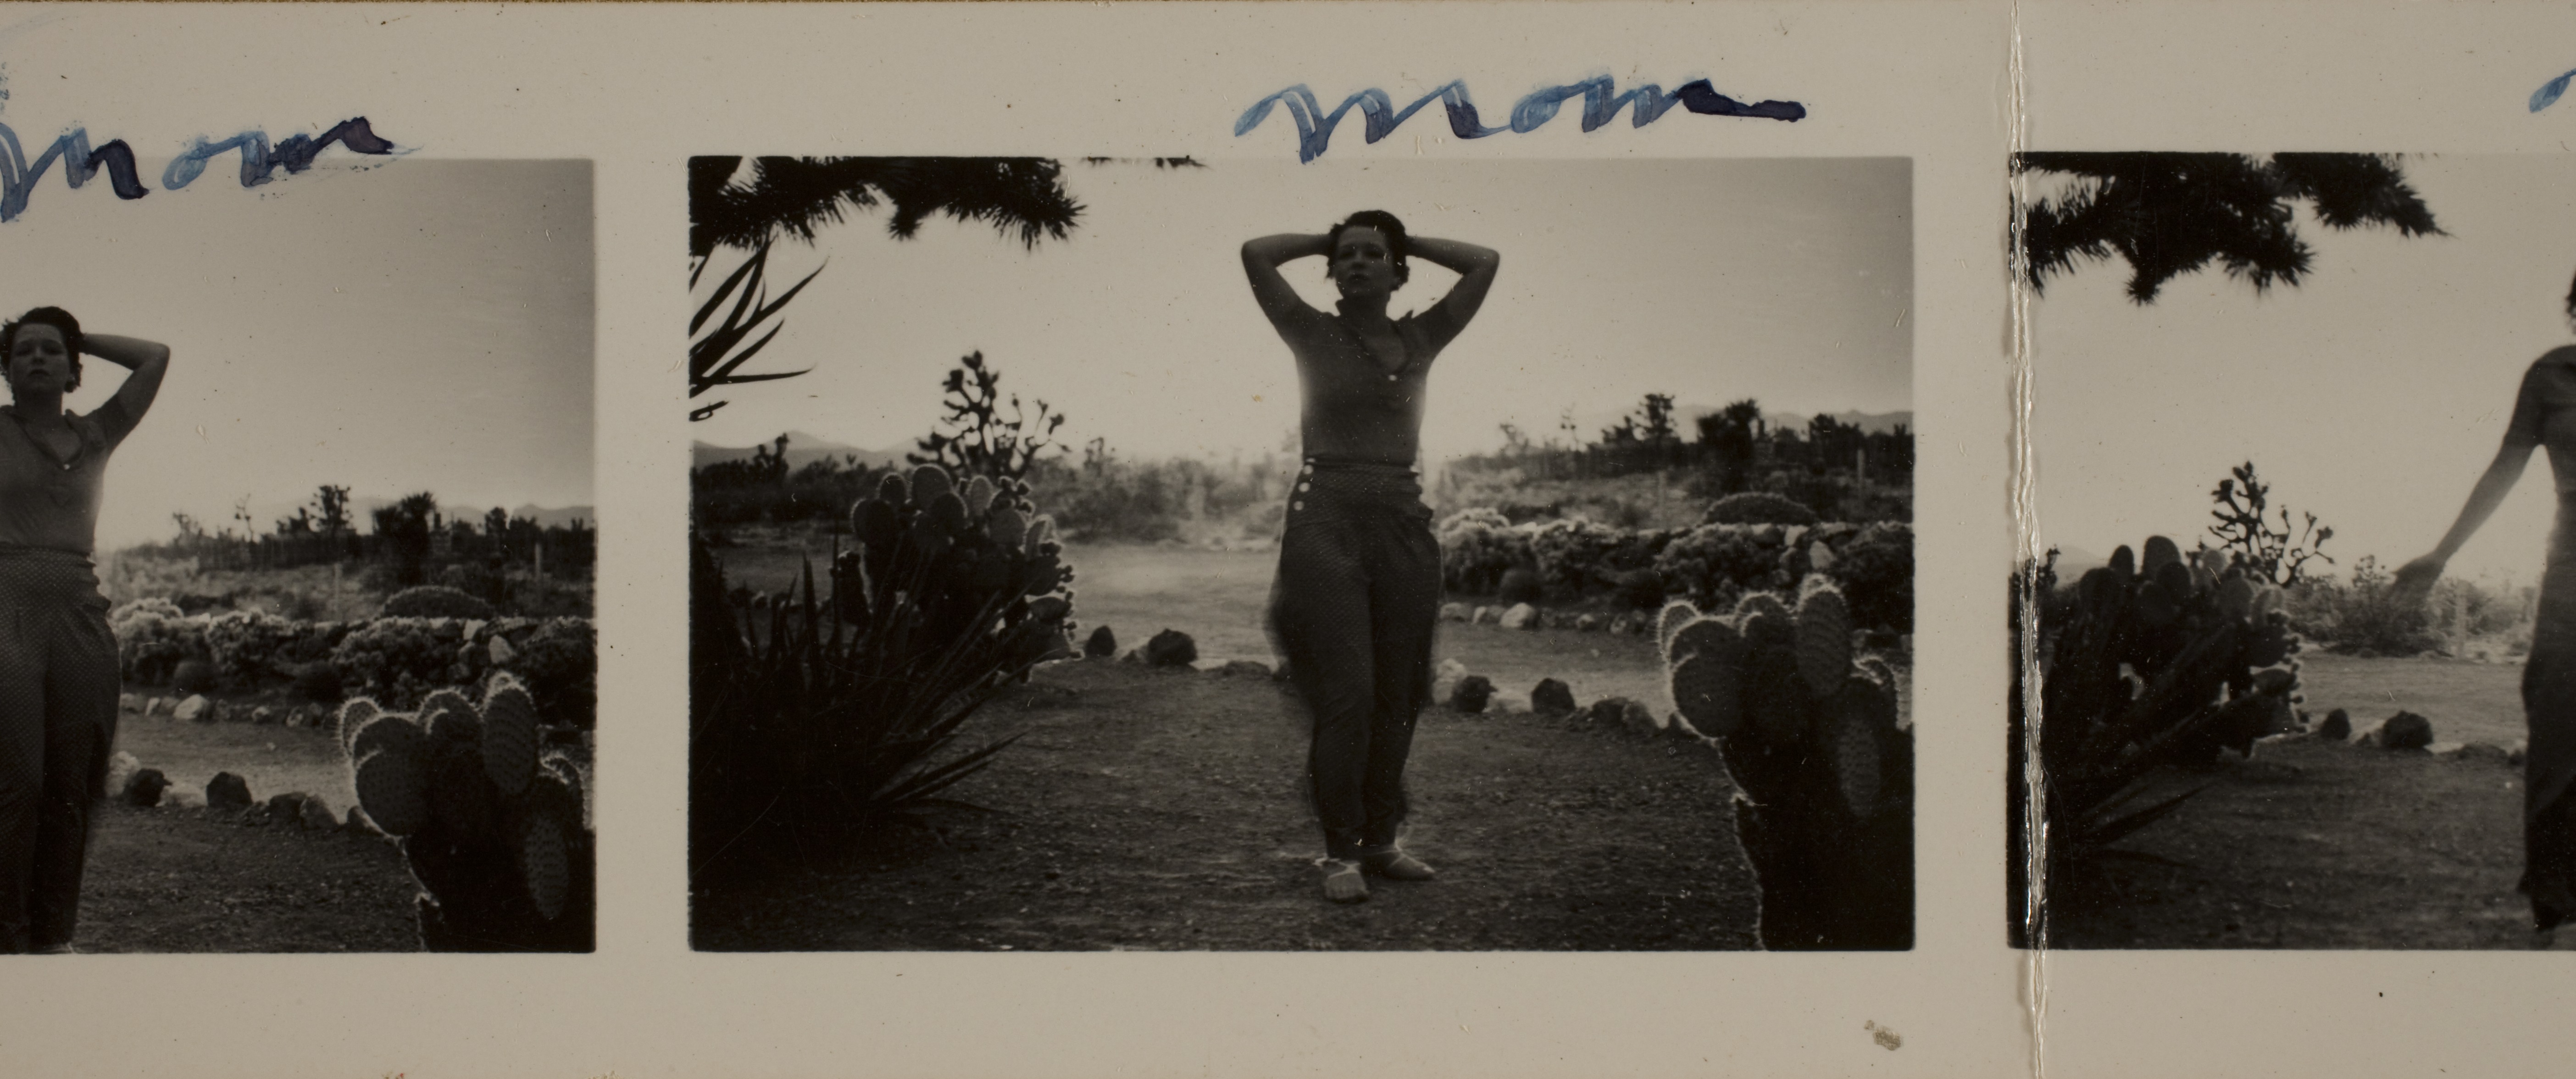 Clara Bow at Walking Box Ranch, Nevada in front of Ranch house." Rock gardens are in the background: photographic print